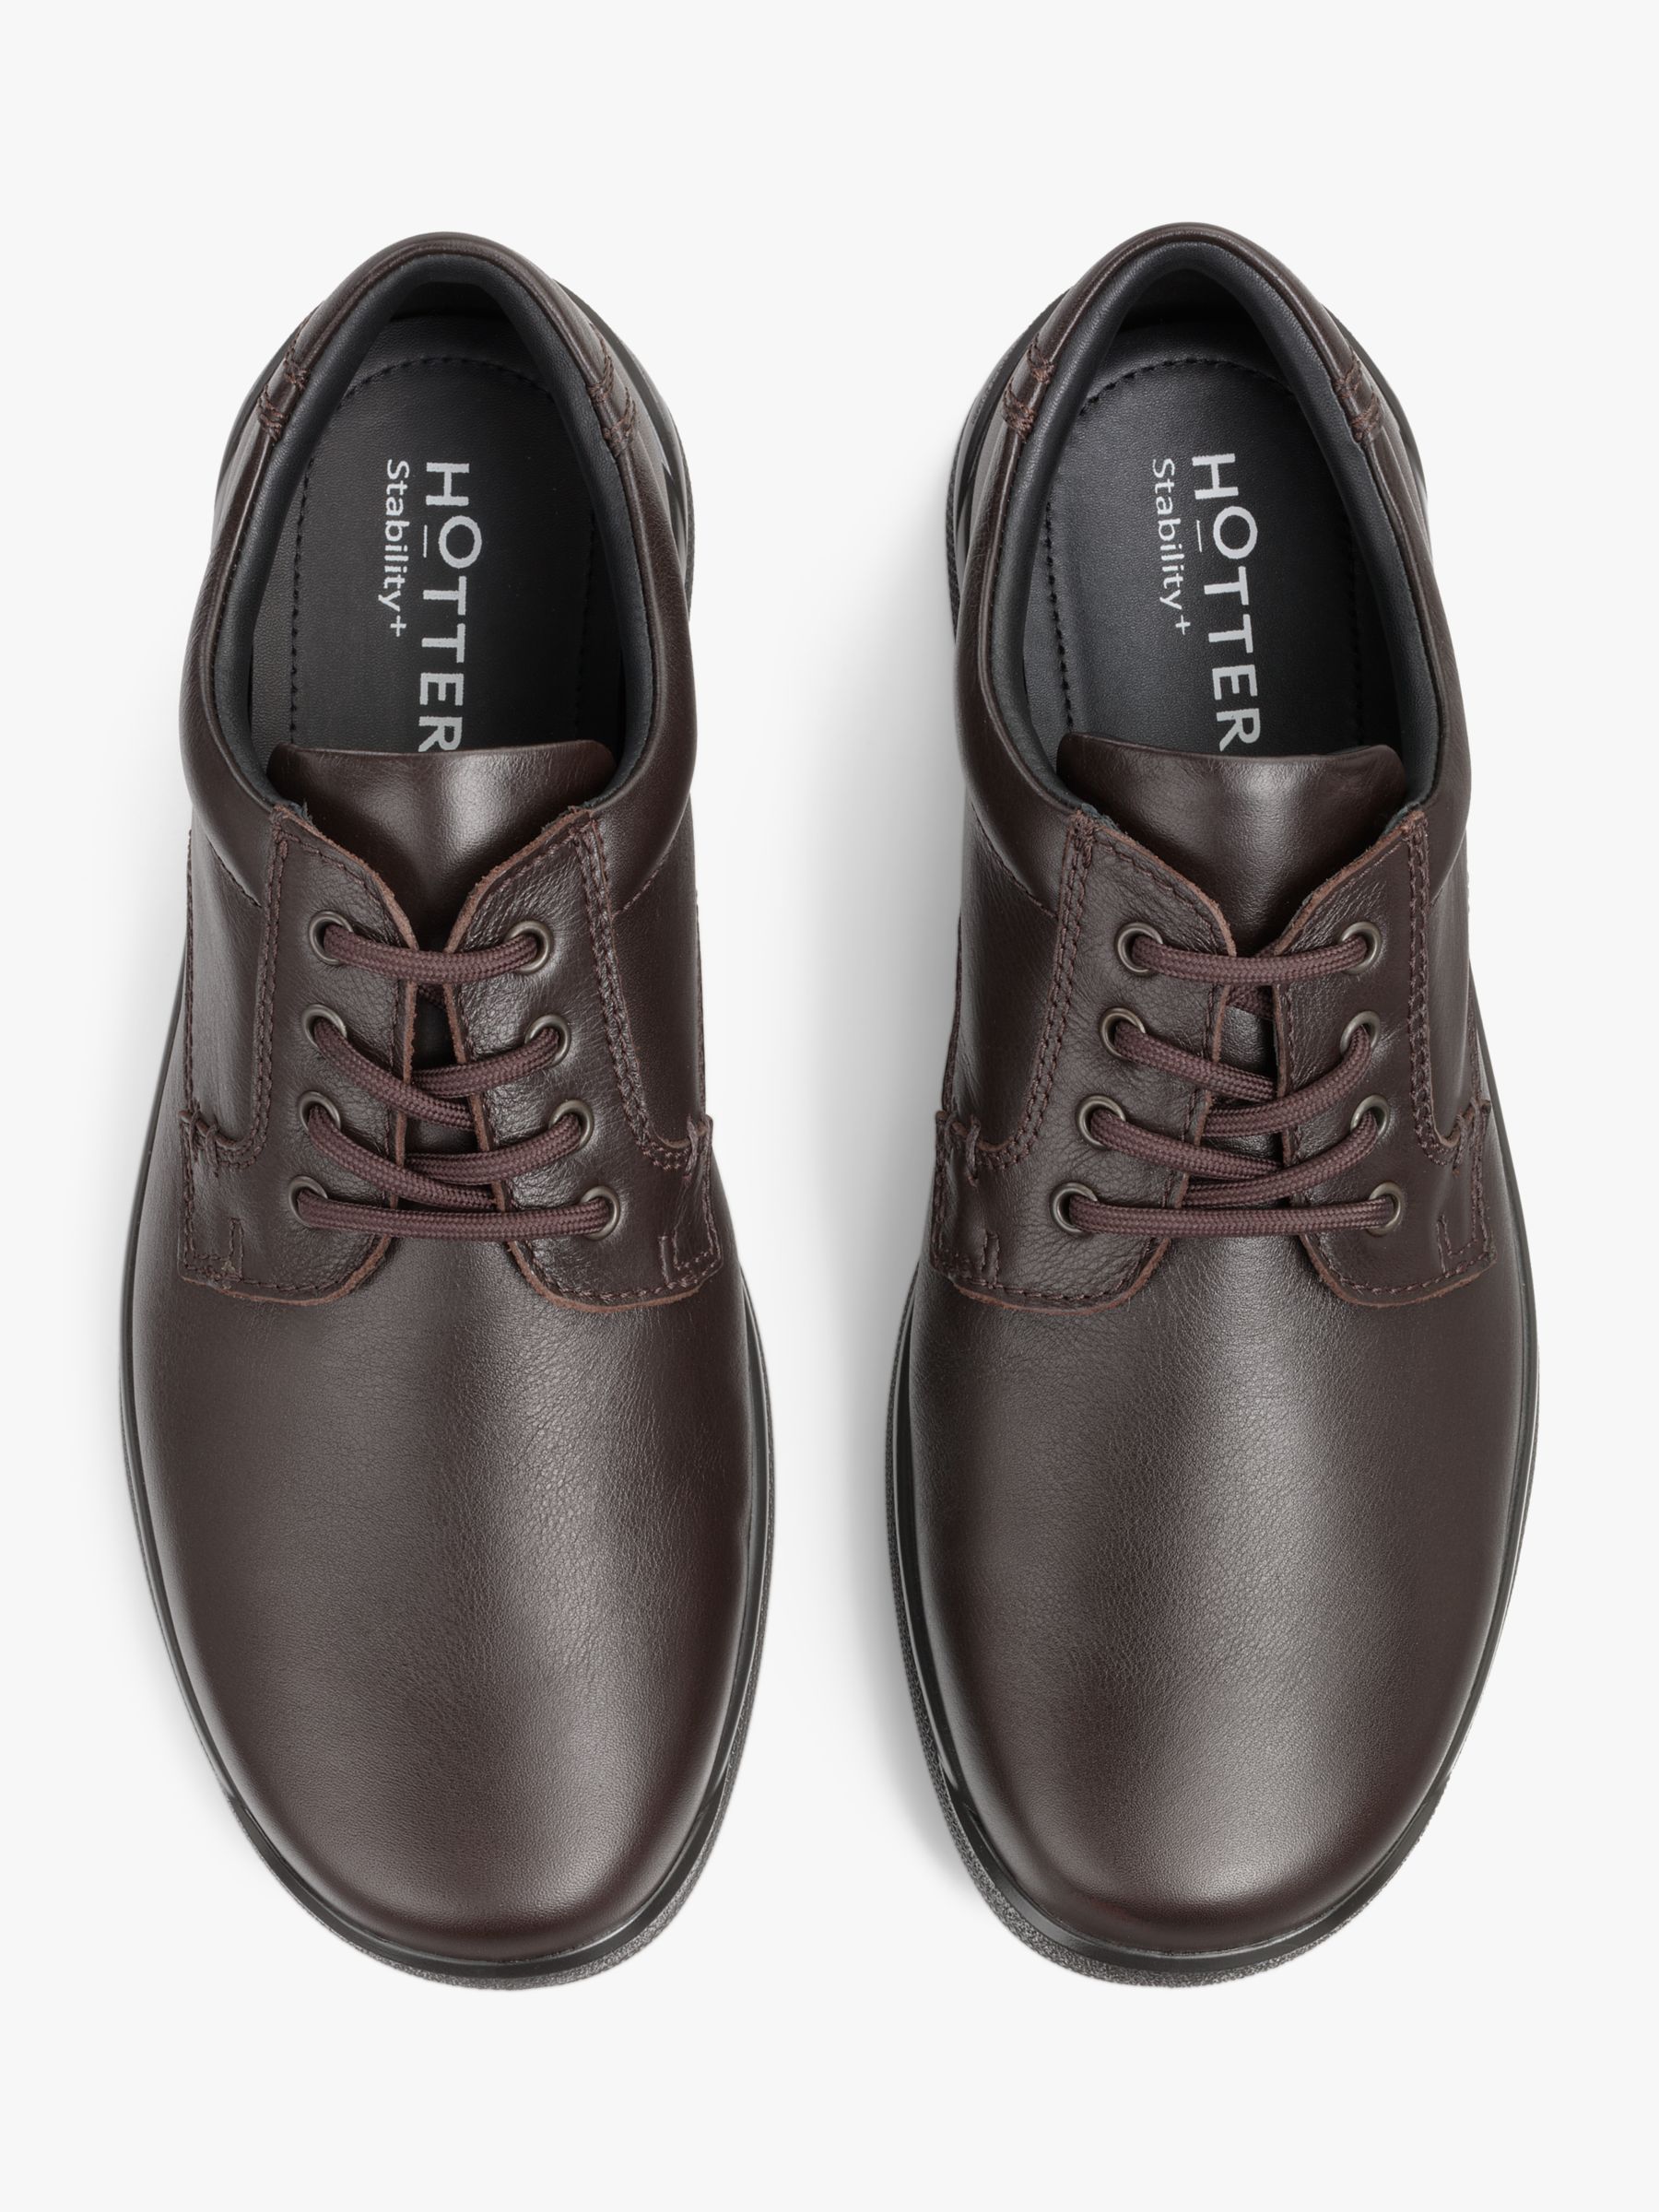 Hotter Burton II Classic Leather Lace-Up Derby Shoes, Dark Brown, 6S